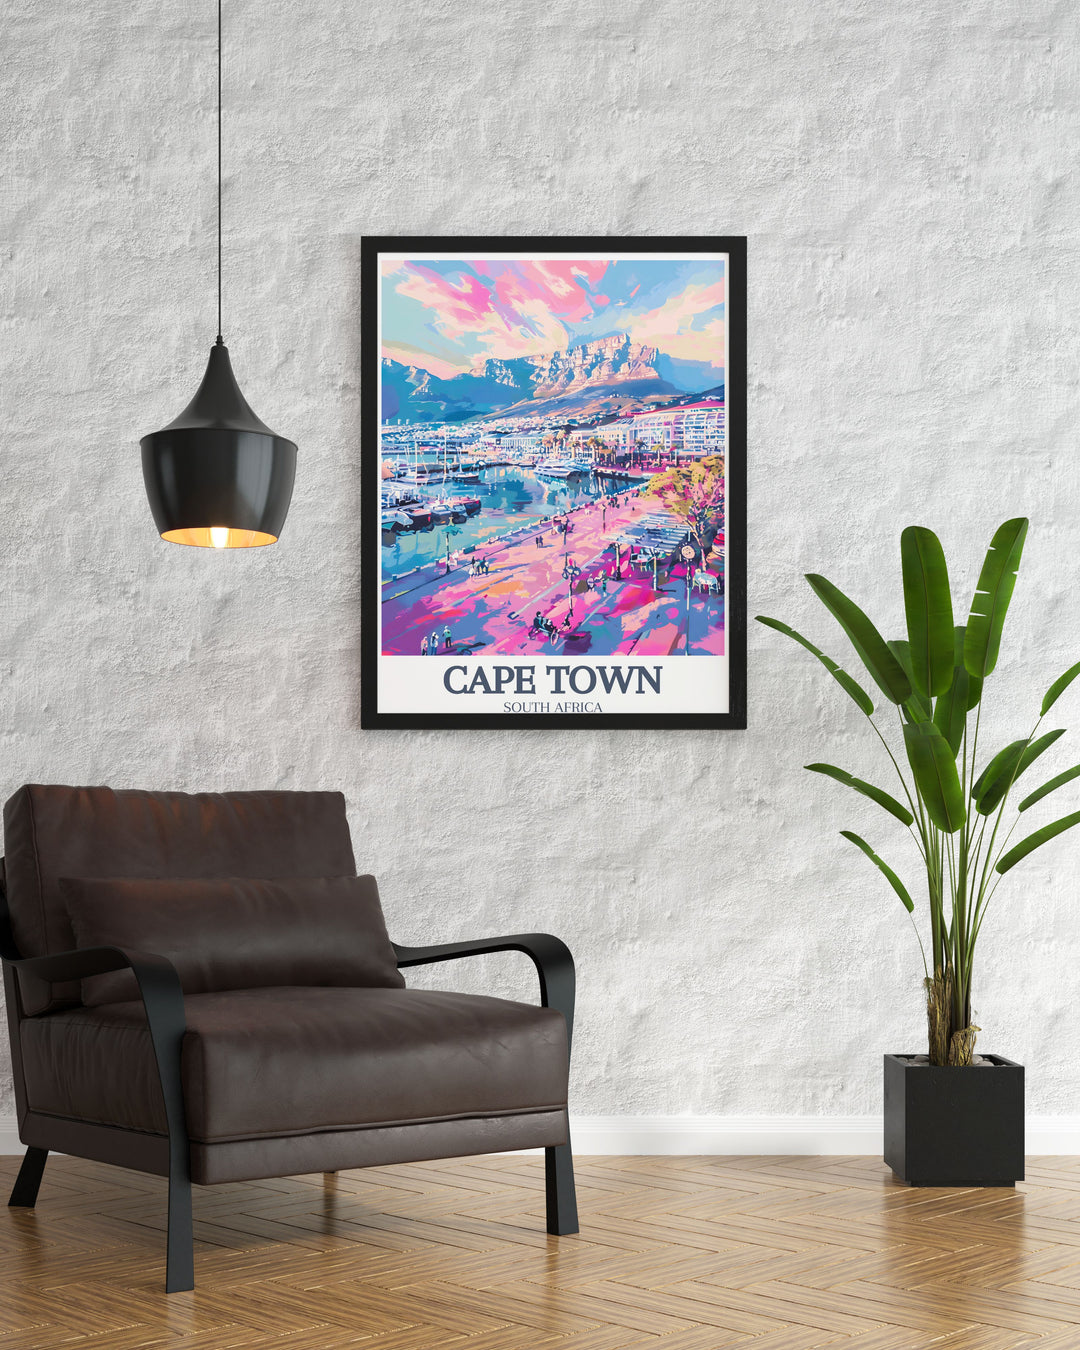 Beautiful South Africa wall decor showcasing the iconic Table Mountain and Cape of Good Hope. This Cape Town poster is perfect for enhancing your living space with the natural beauty of South Africas landscapes. Ideal for travel and art lovers alike.